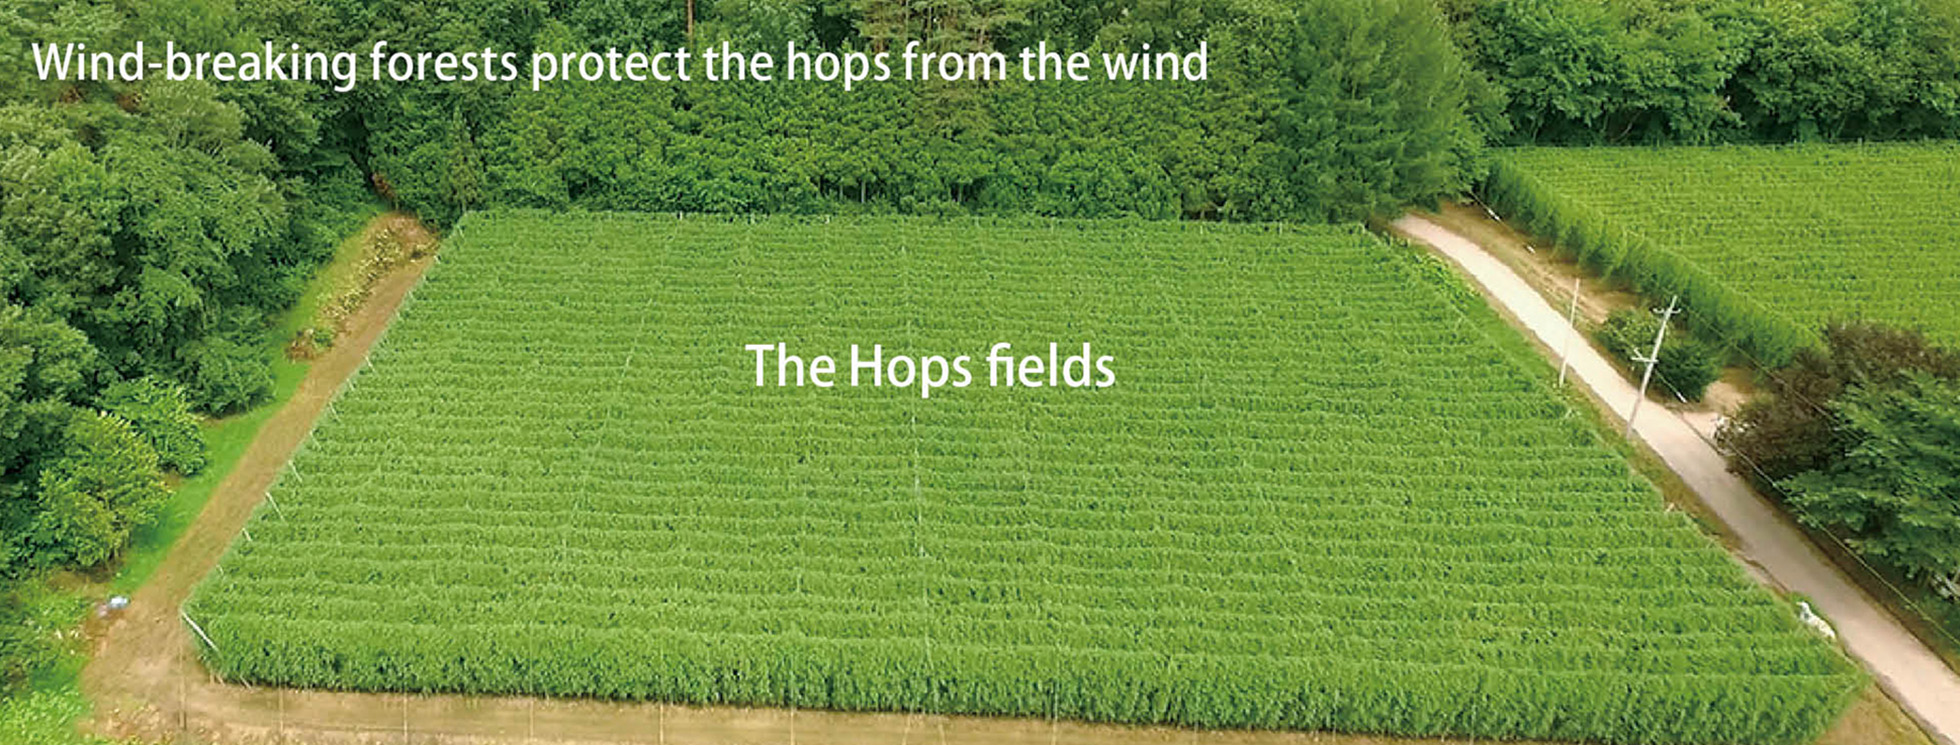 Image: Wind-breaking forests protect the hops from the wind